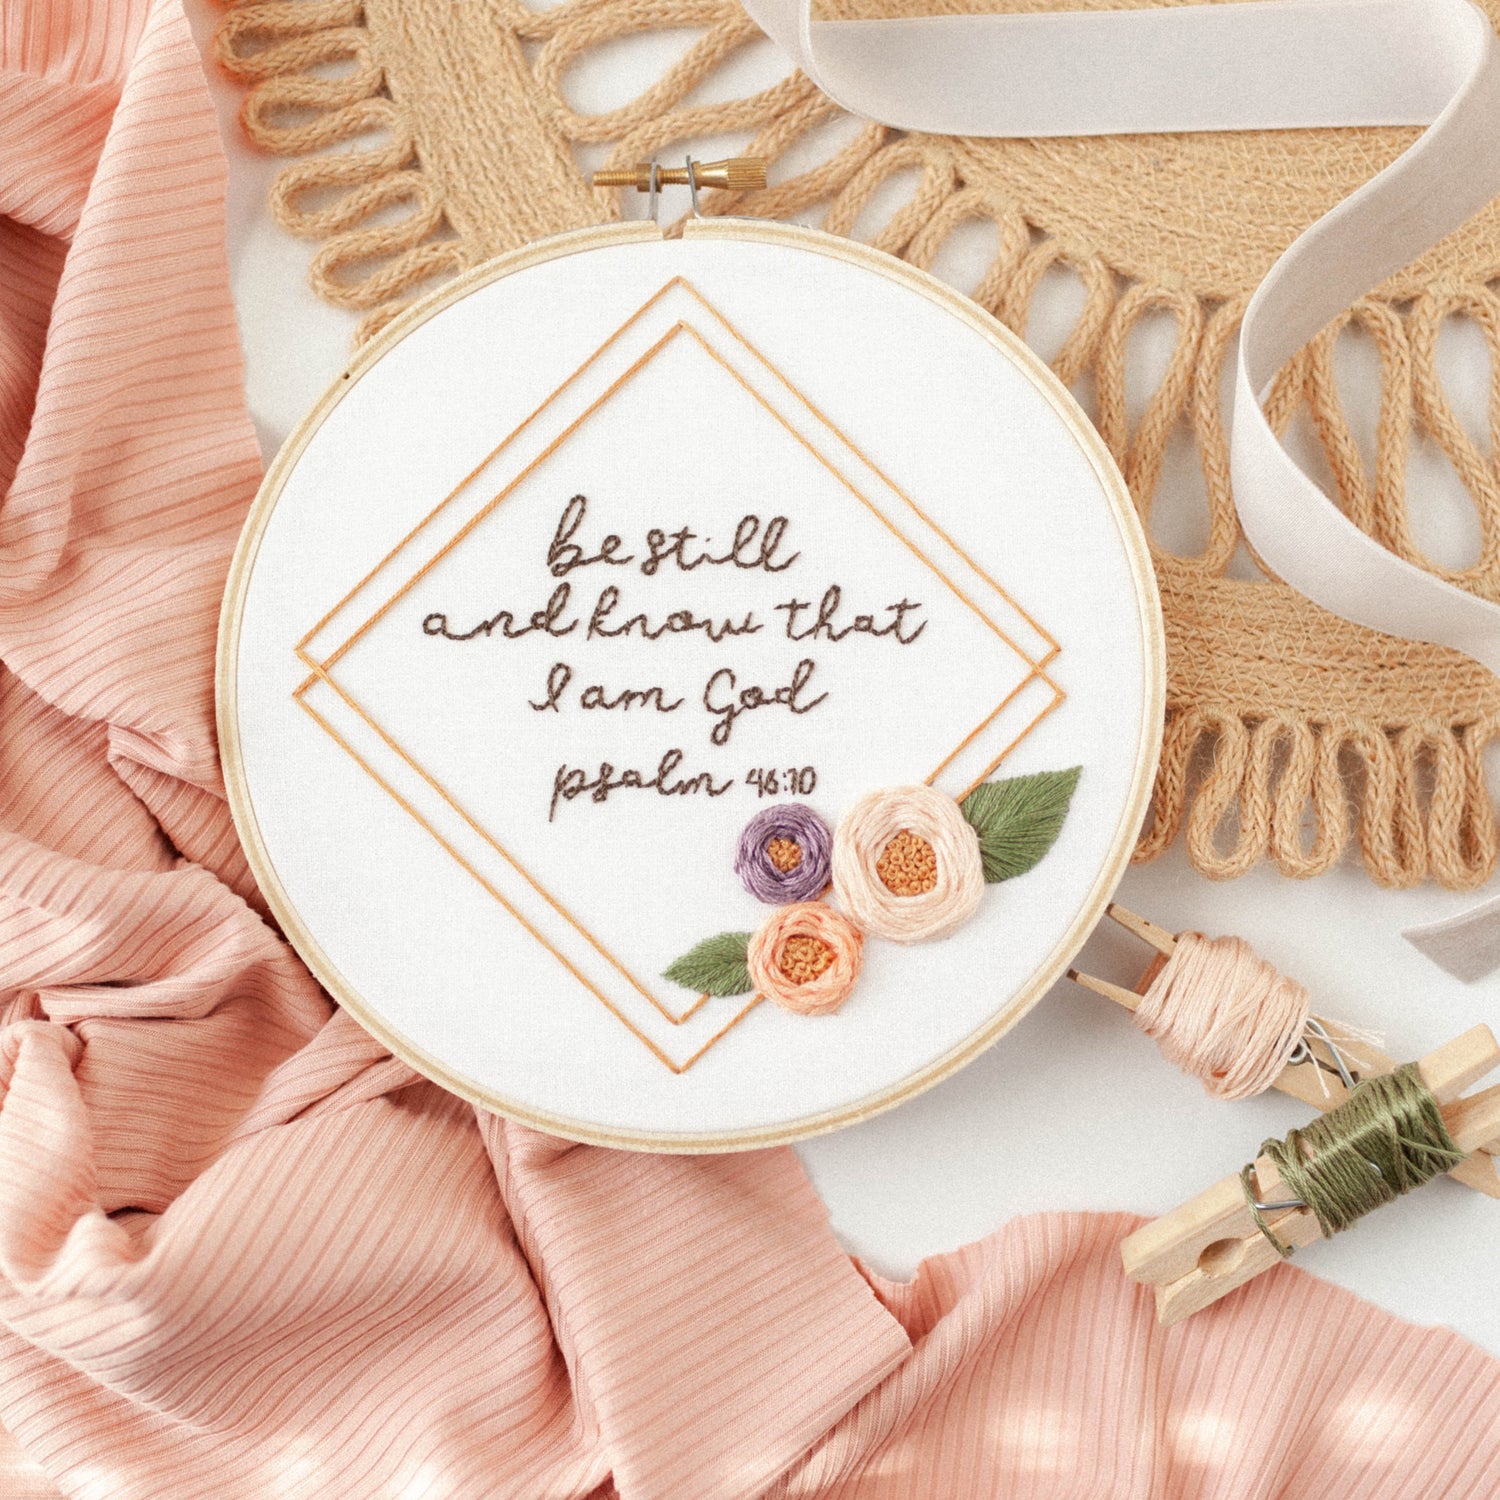 “Be Still and Know That I Am God” (Psalm 46:10) — Digital Download - Abide Embroidery Co.